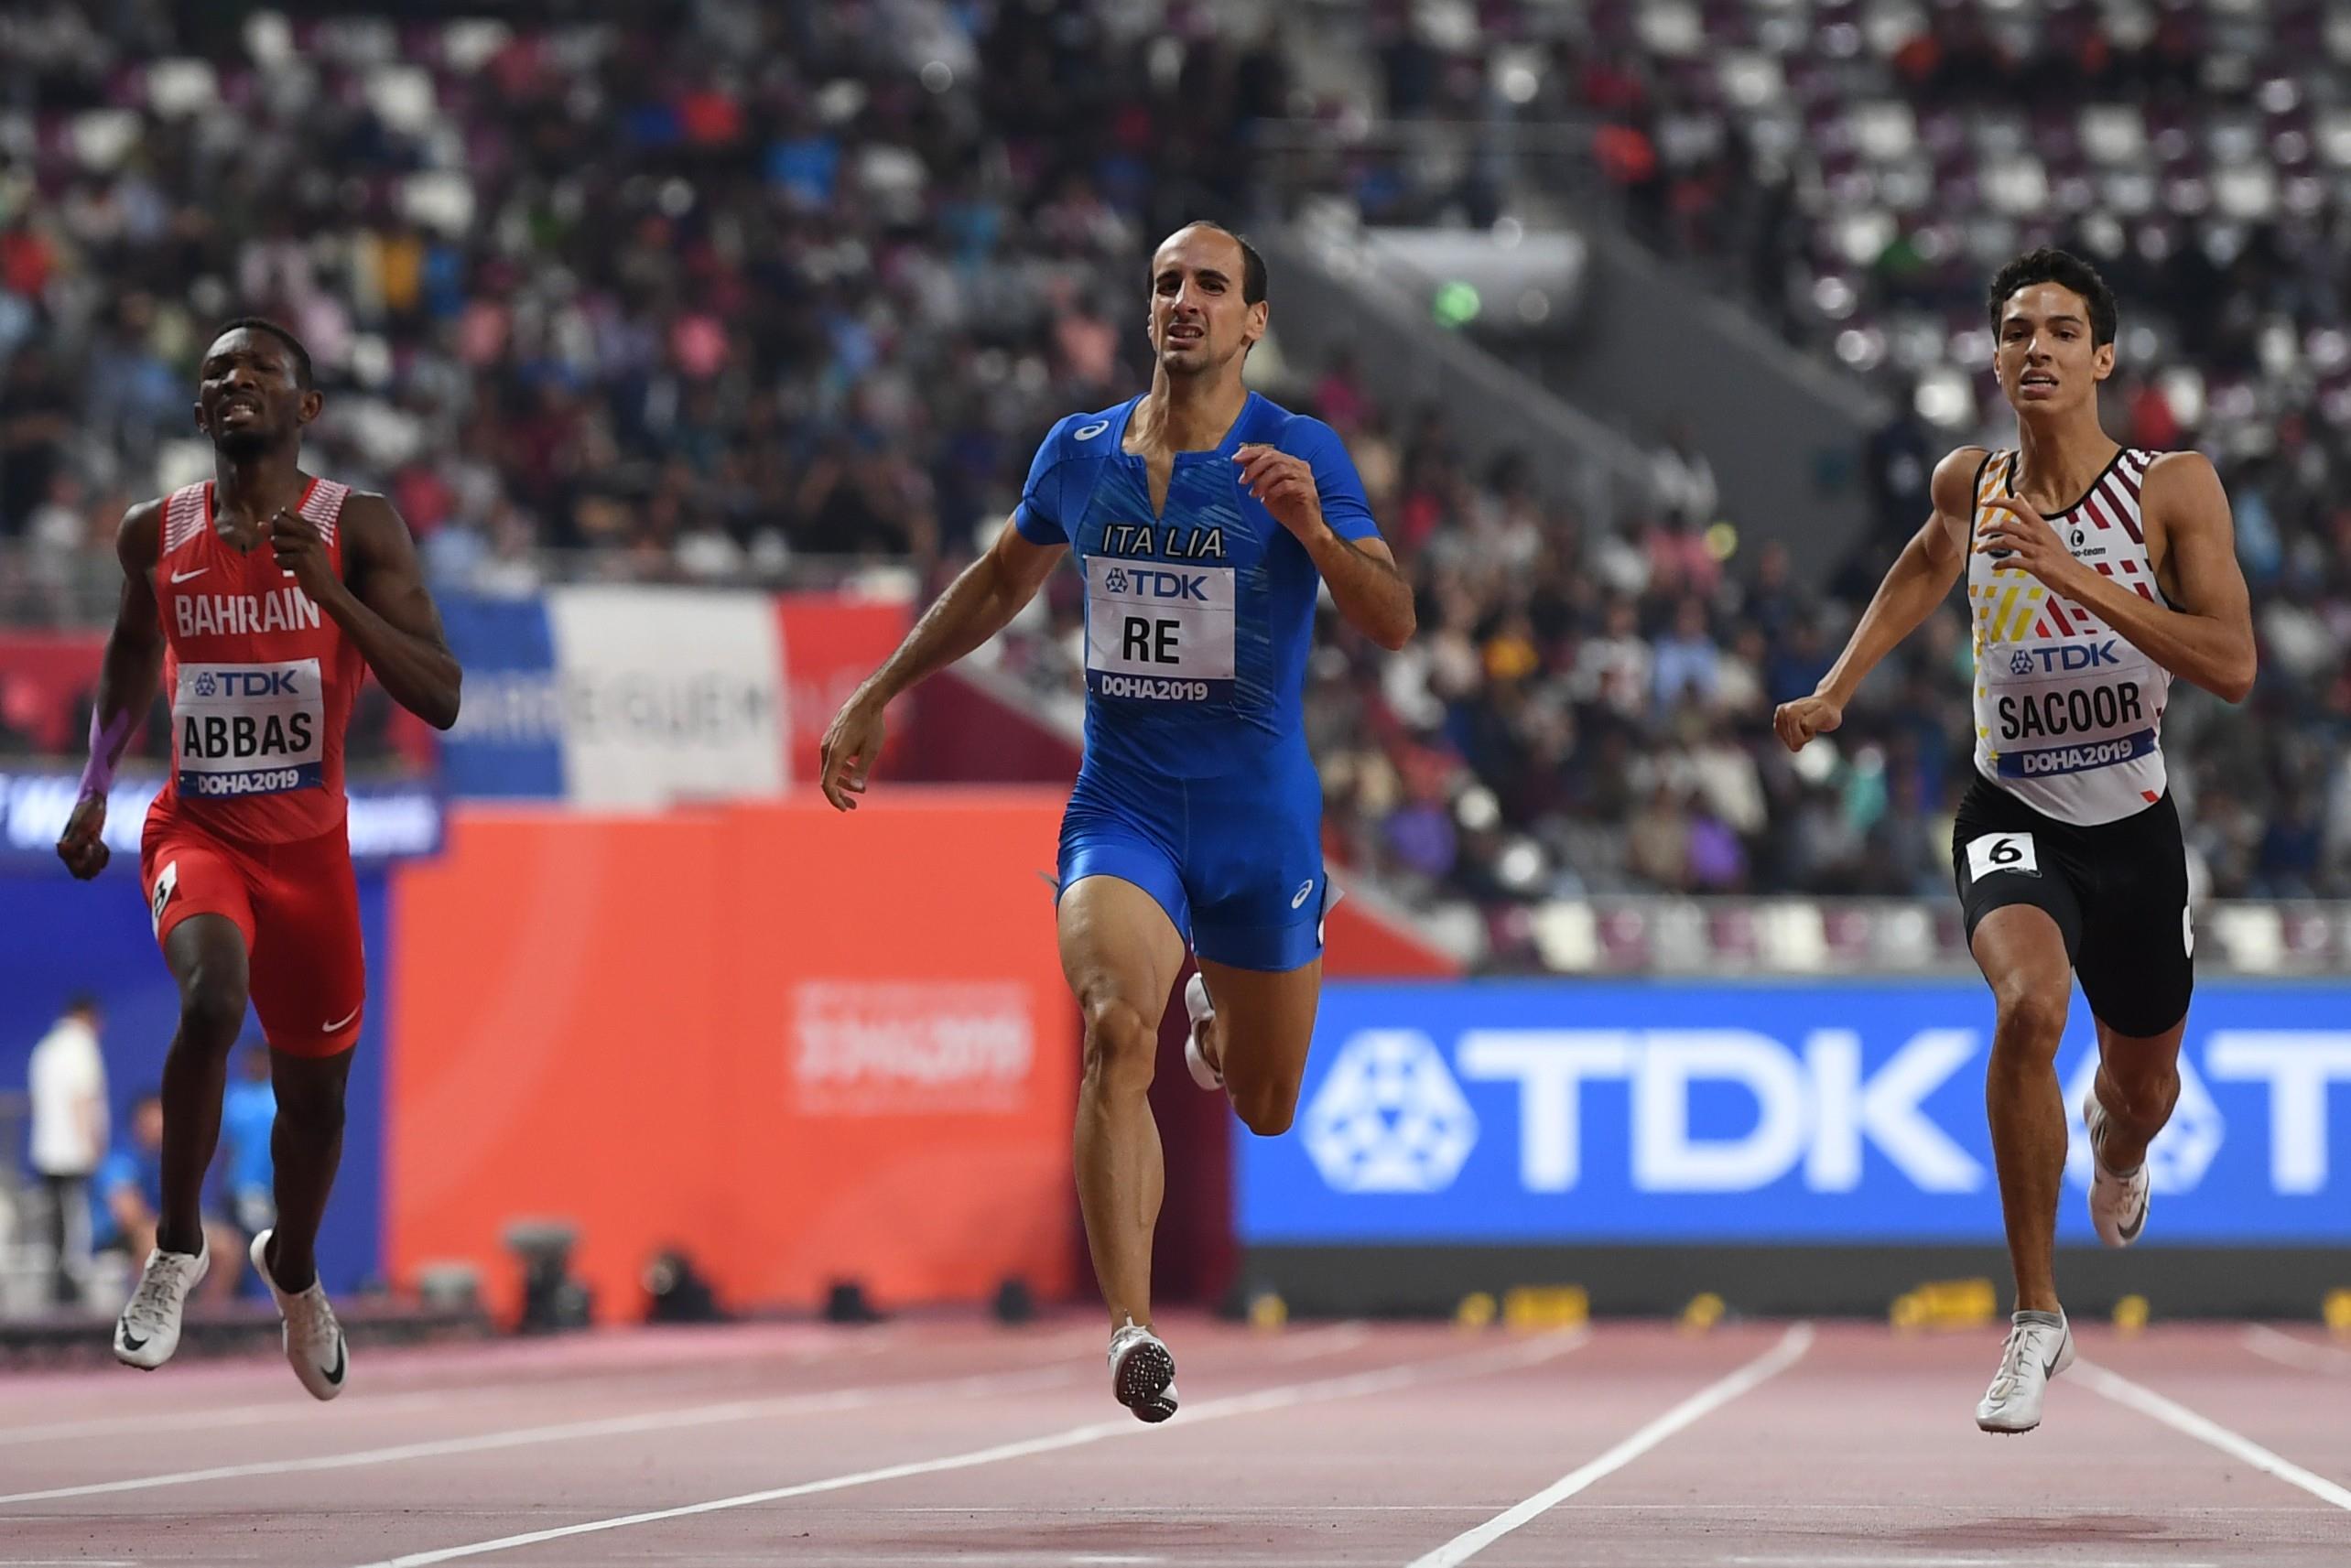 Men's 400m semifinal at the World Athletics Championships Doha 2019 (AFP / Getty Images)